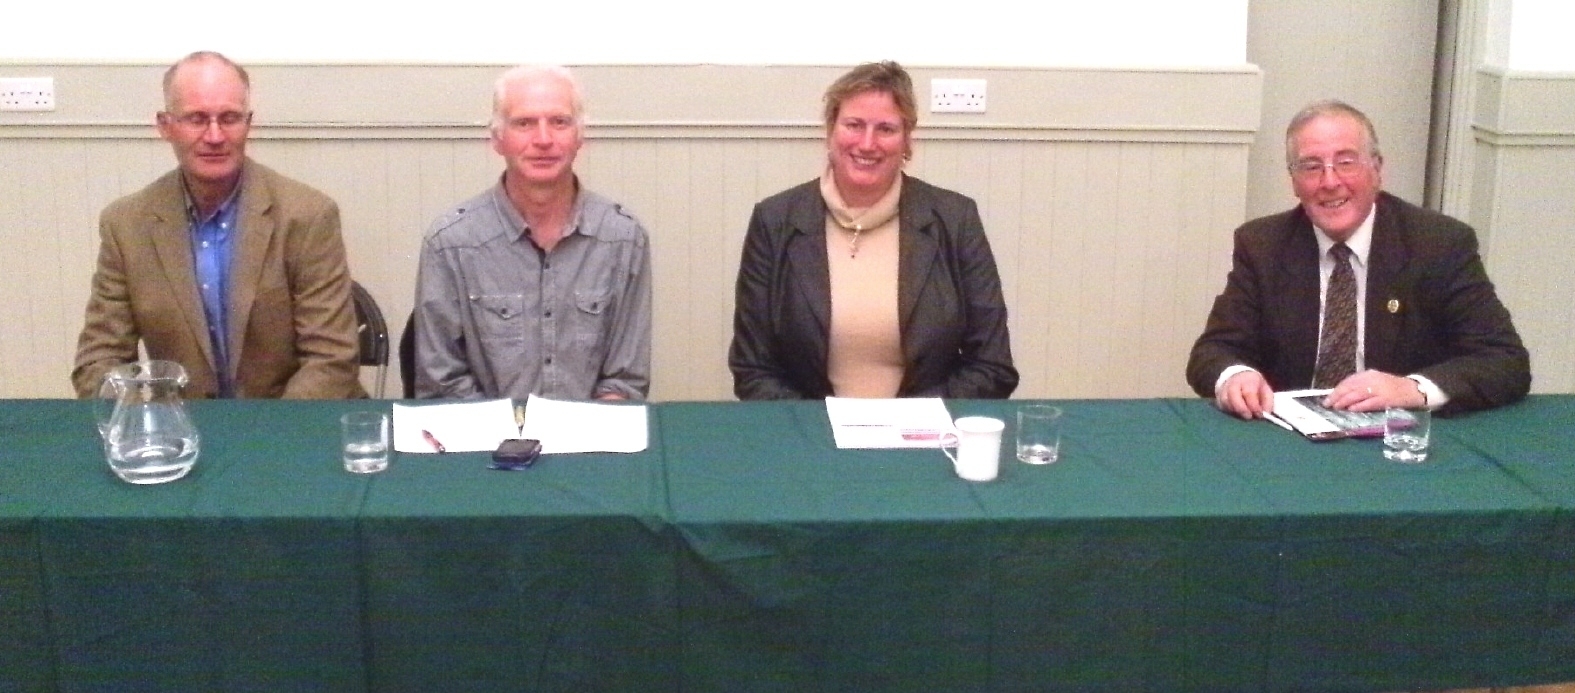 AGM TOP TABLE: From left, Tim Faire, Clwyd Spencer, Antoinette Sandbach and Warwick Nicholson.